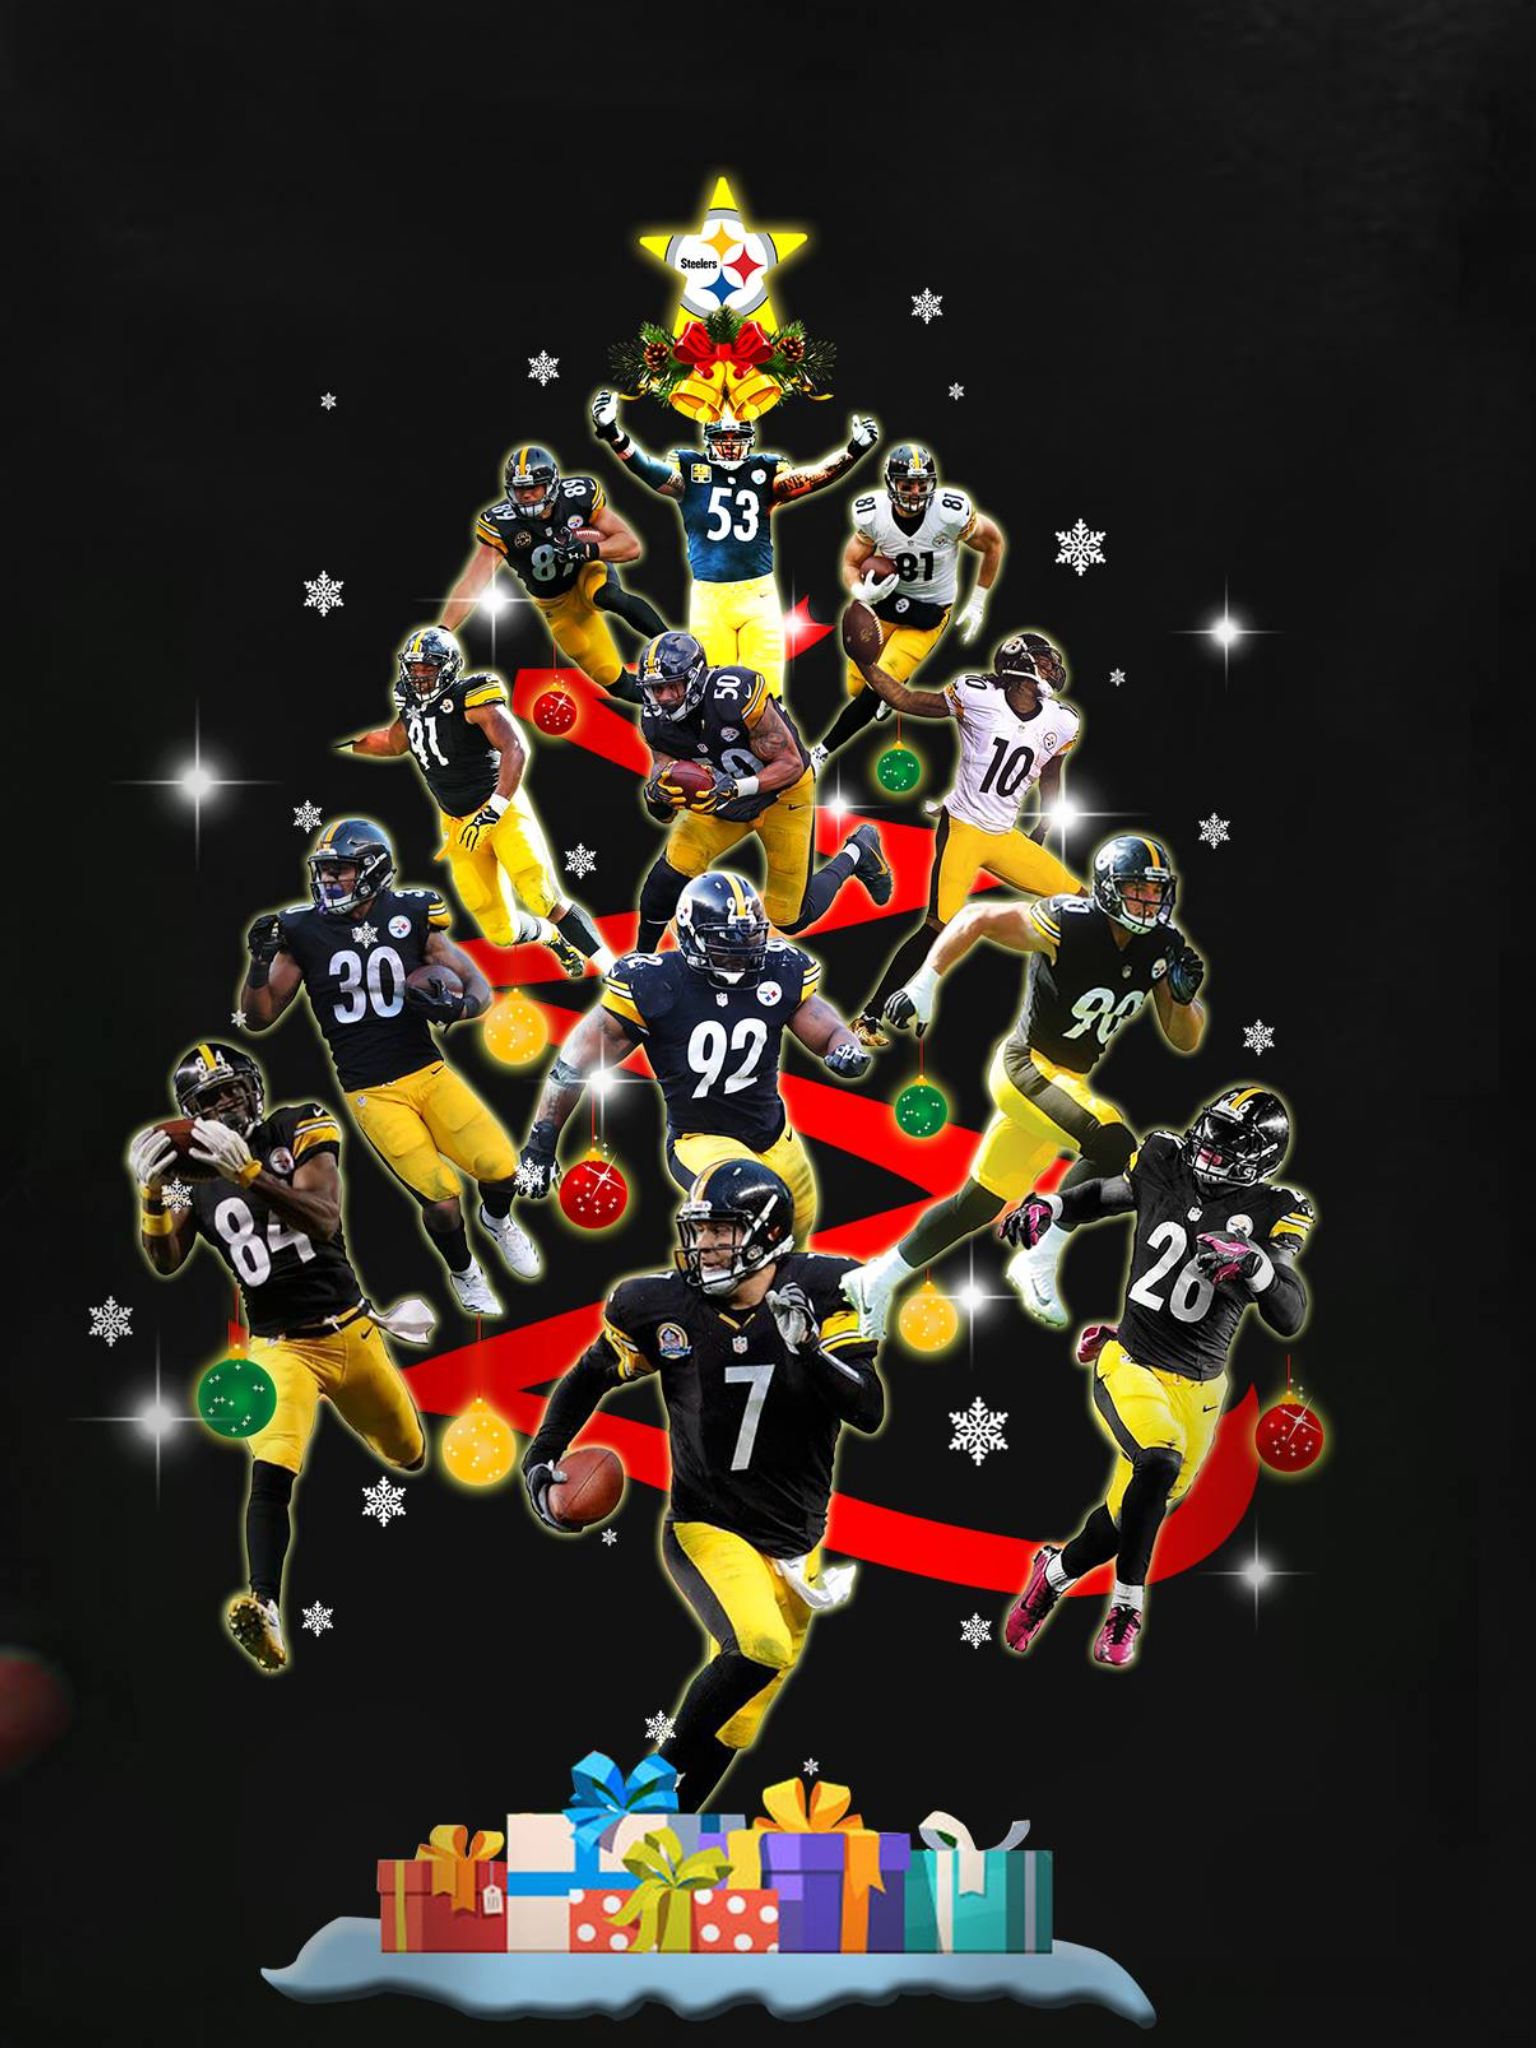 1536x2048 900+ The Pittsburgh Steelers ideas in 2022 | pittsburgh steelers, steelers, pittsburgh